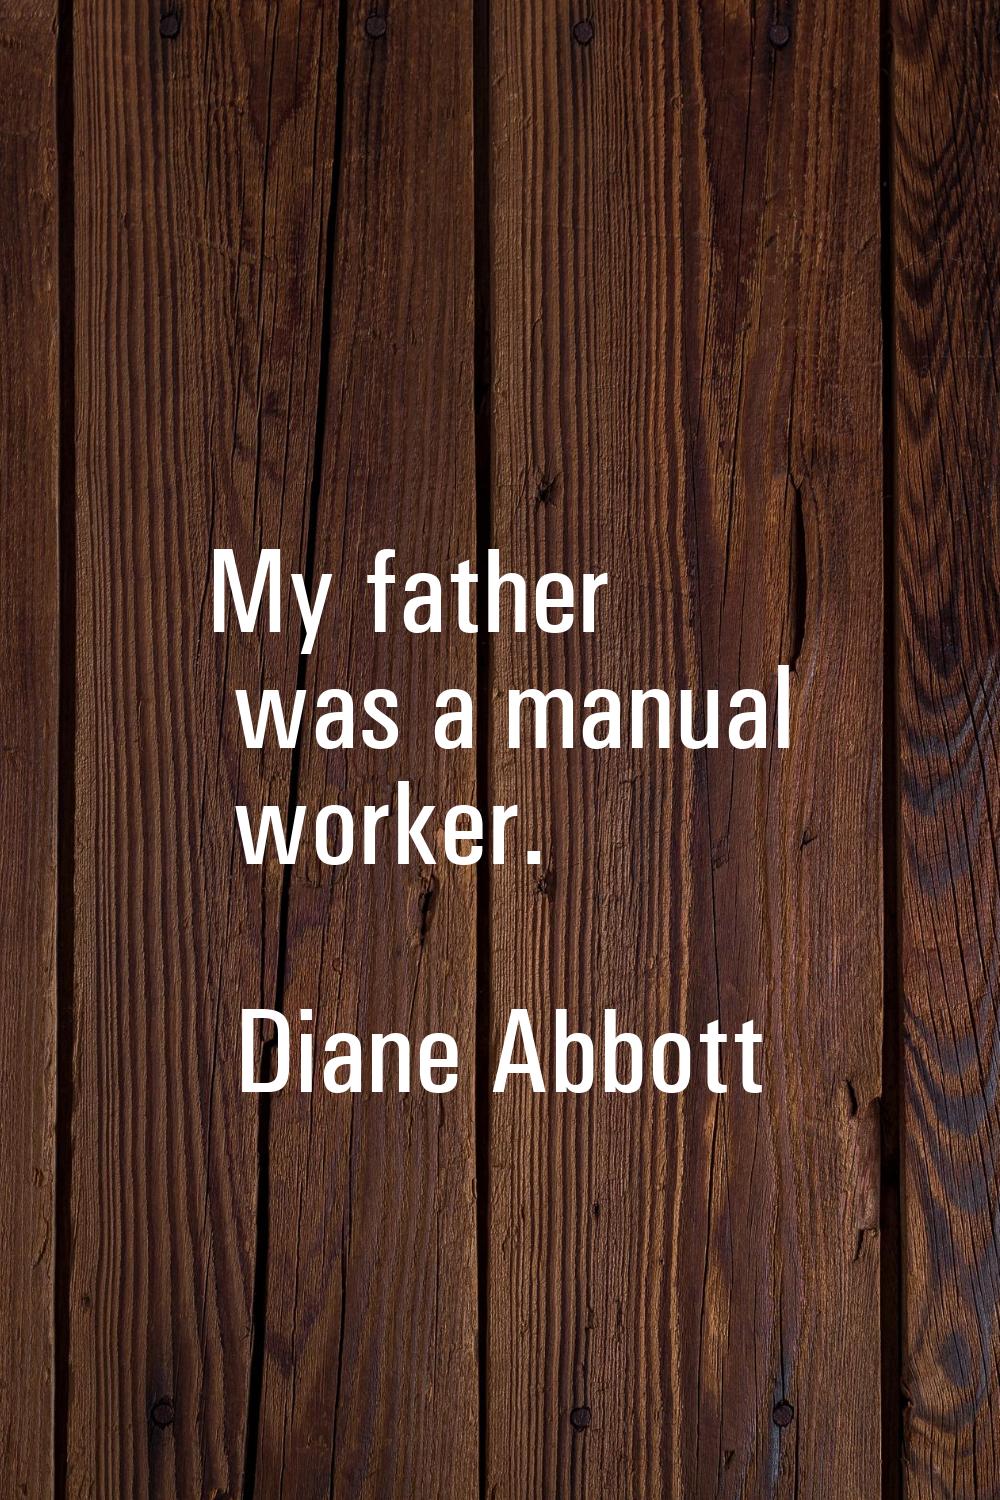 My father was a manual worker.